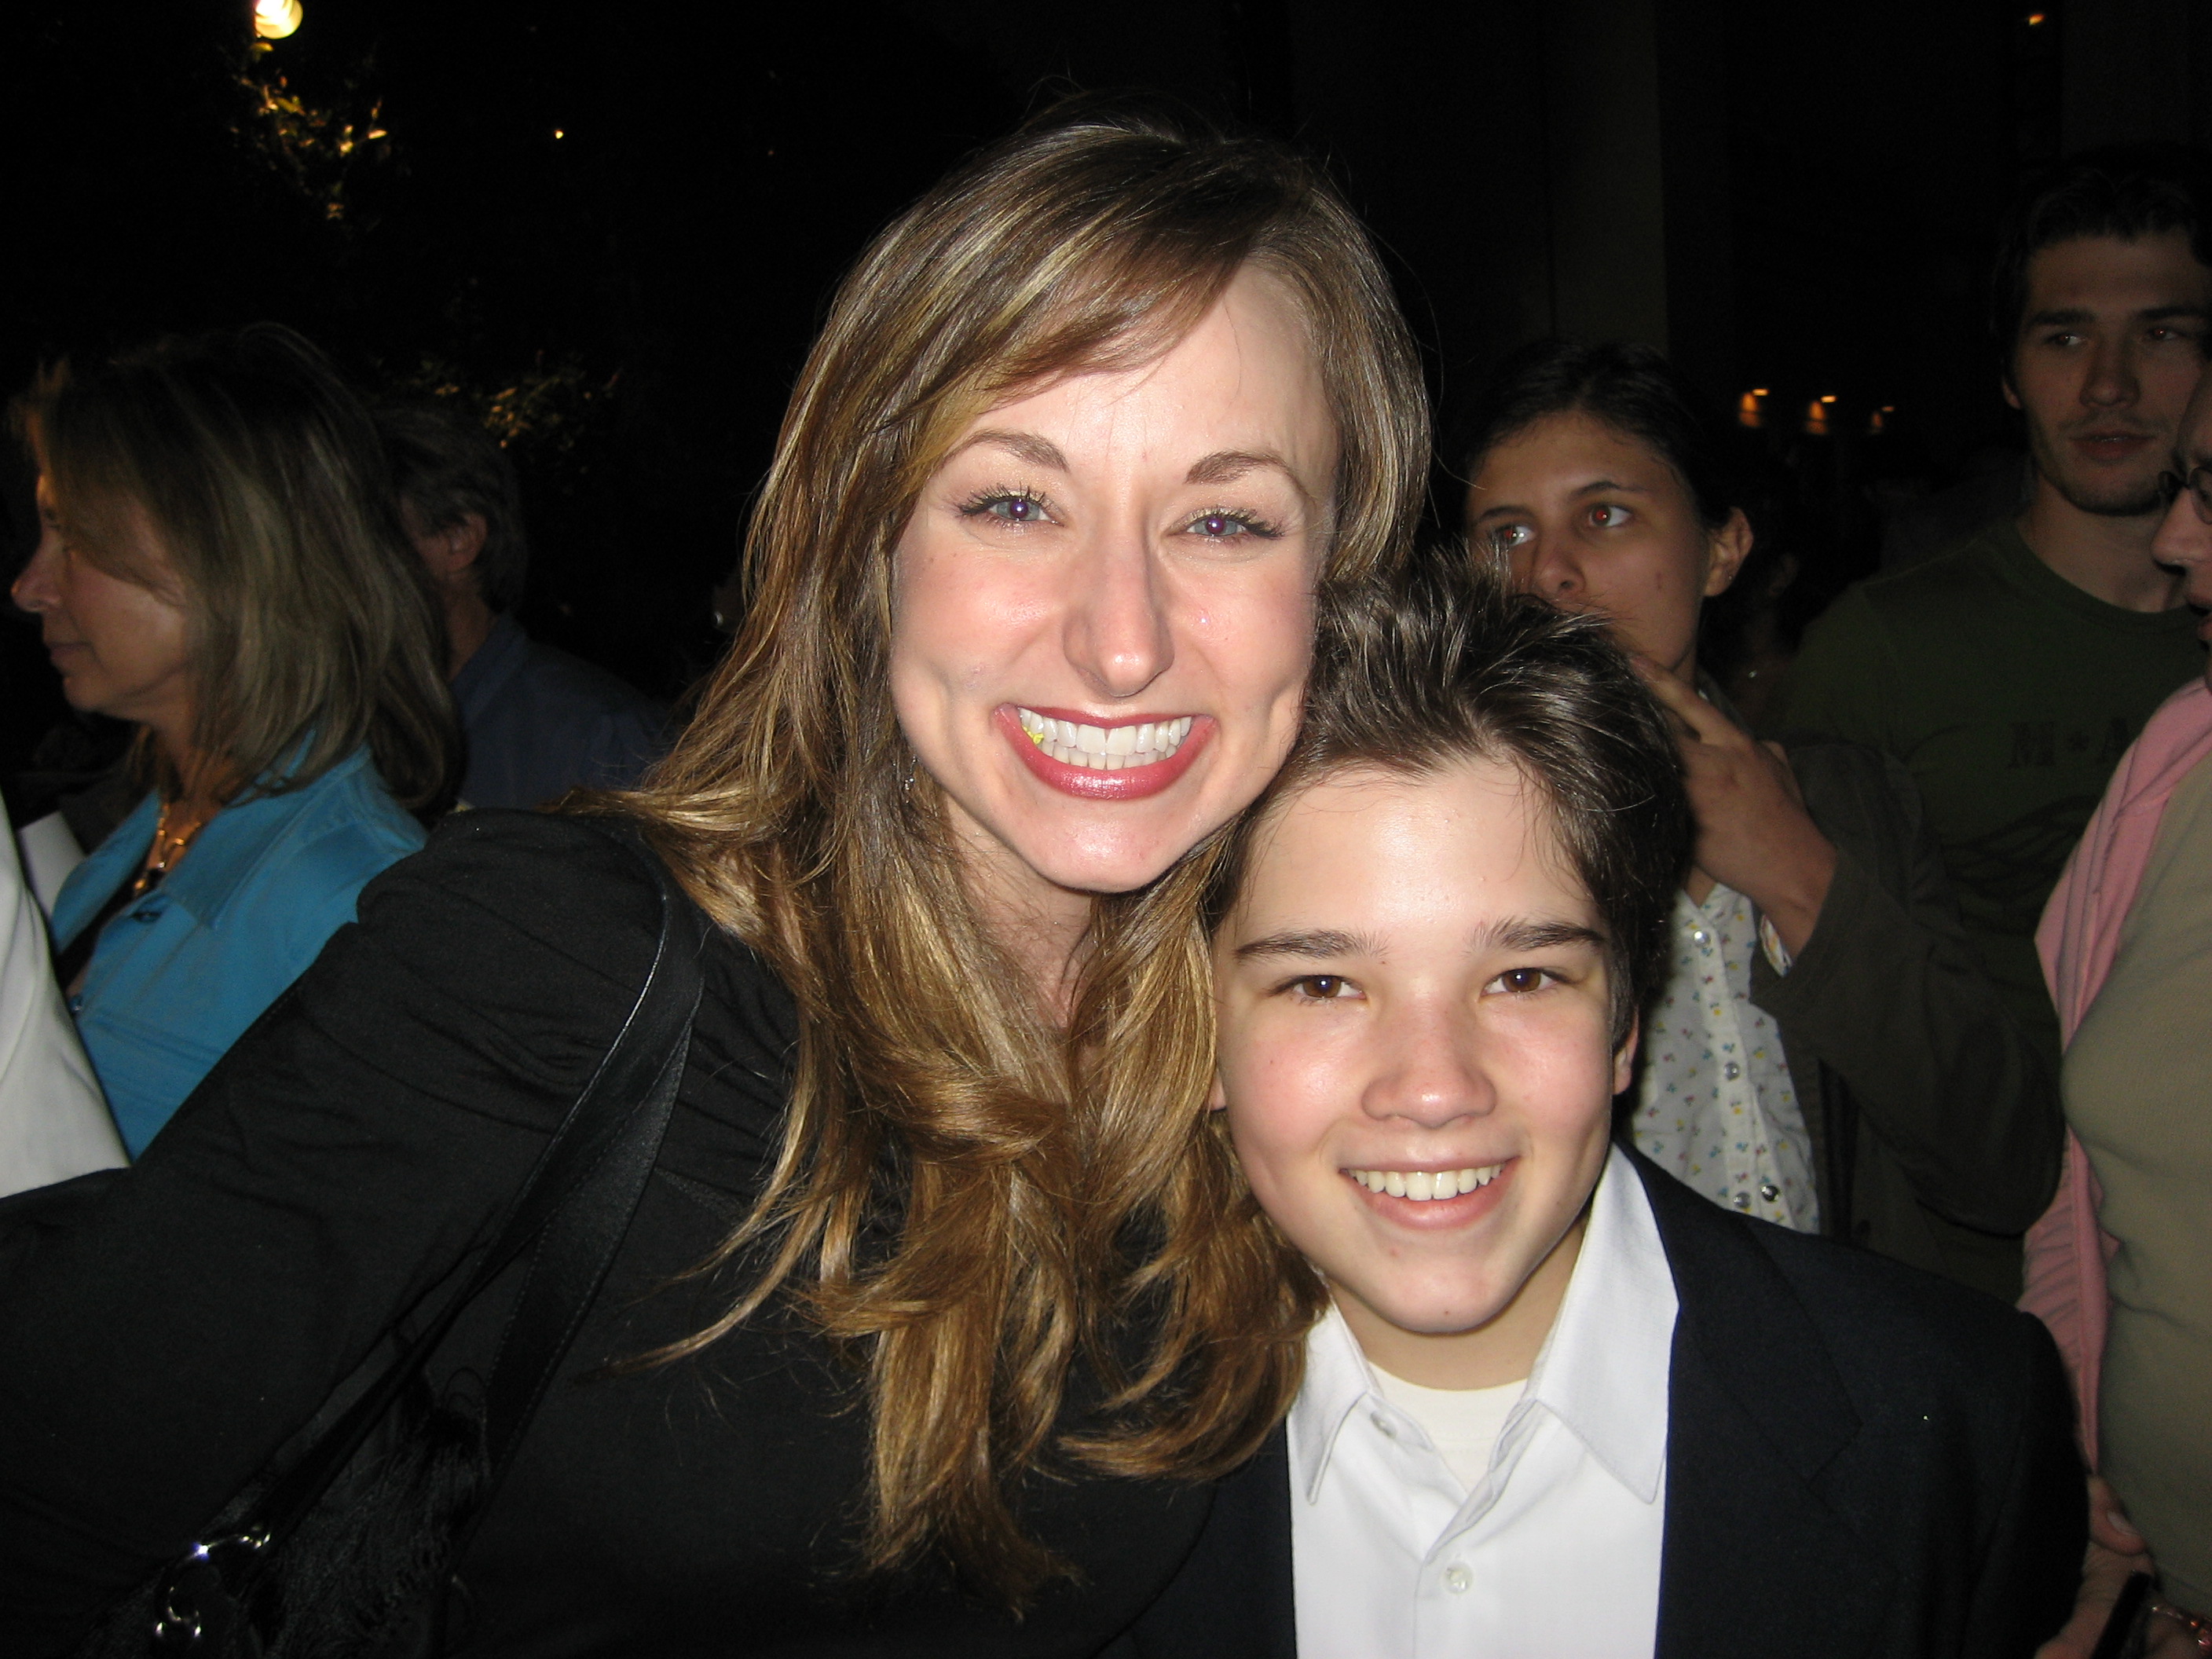 Kimberly Durrett with her on-screen son, iCarly's Nathan Kress, at the 2007 international premiere of, Bag, Best Comedy at the 168 Project Film Festival